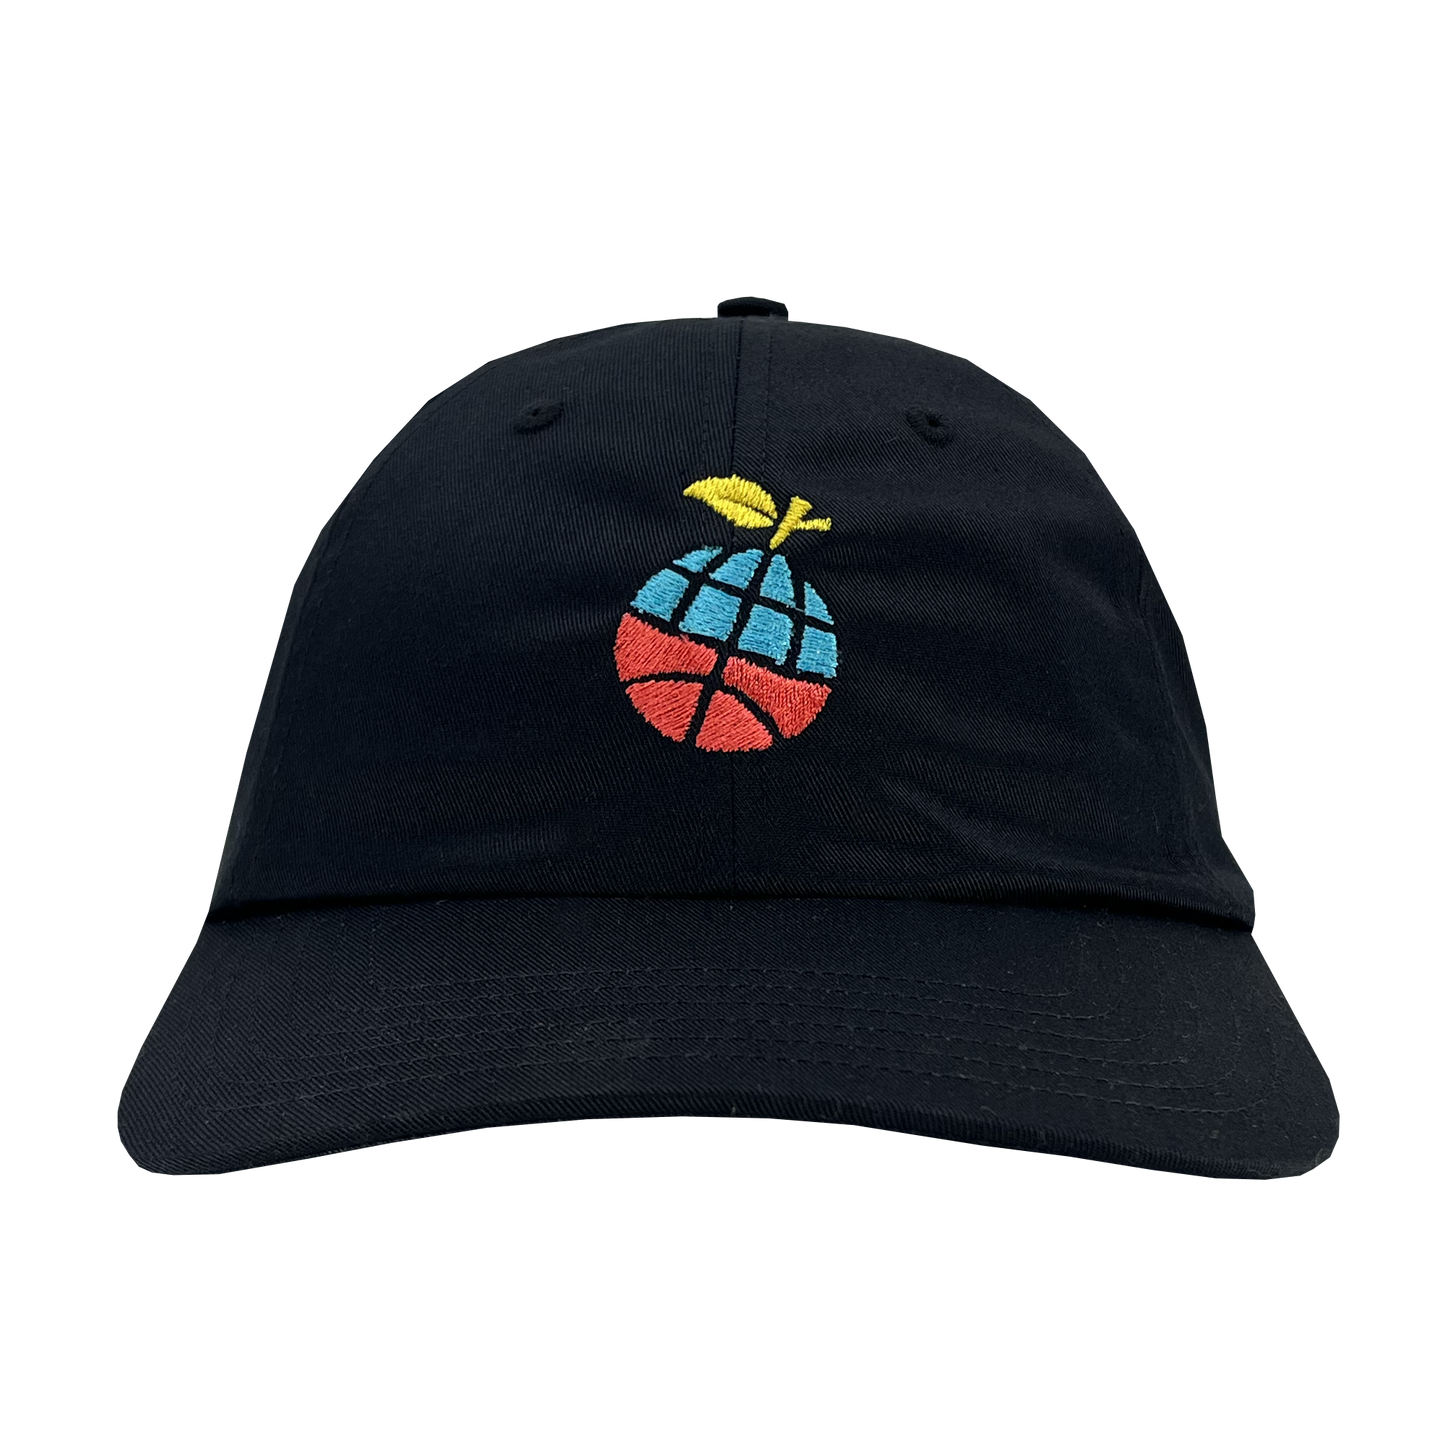 
                  
                    Eat. Learn. Play. Icon Hat - Black
                  
                